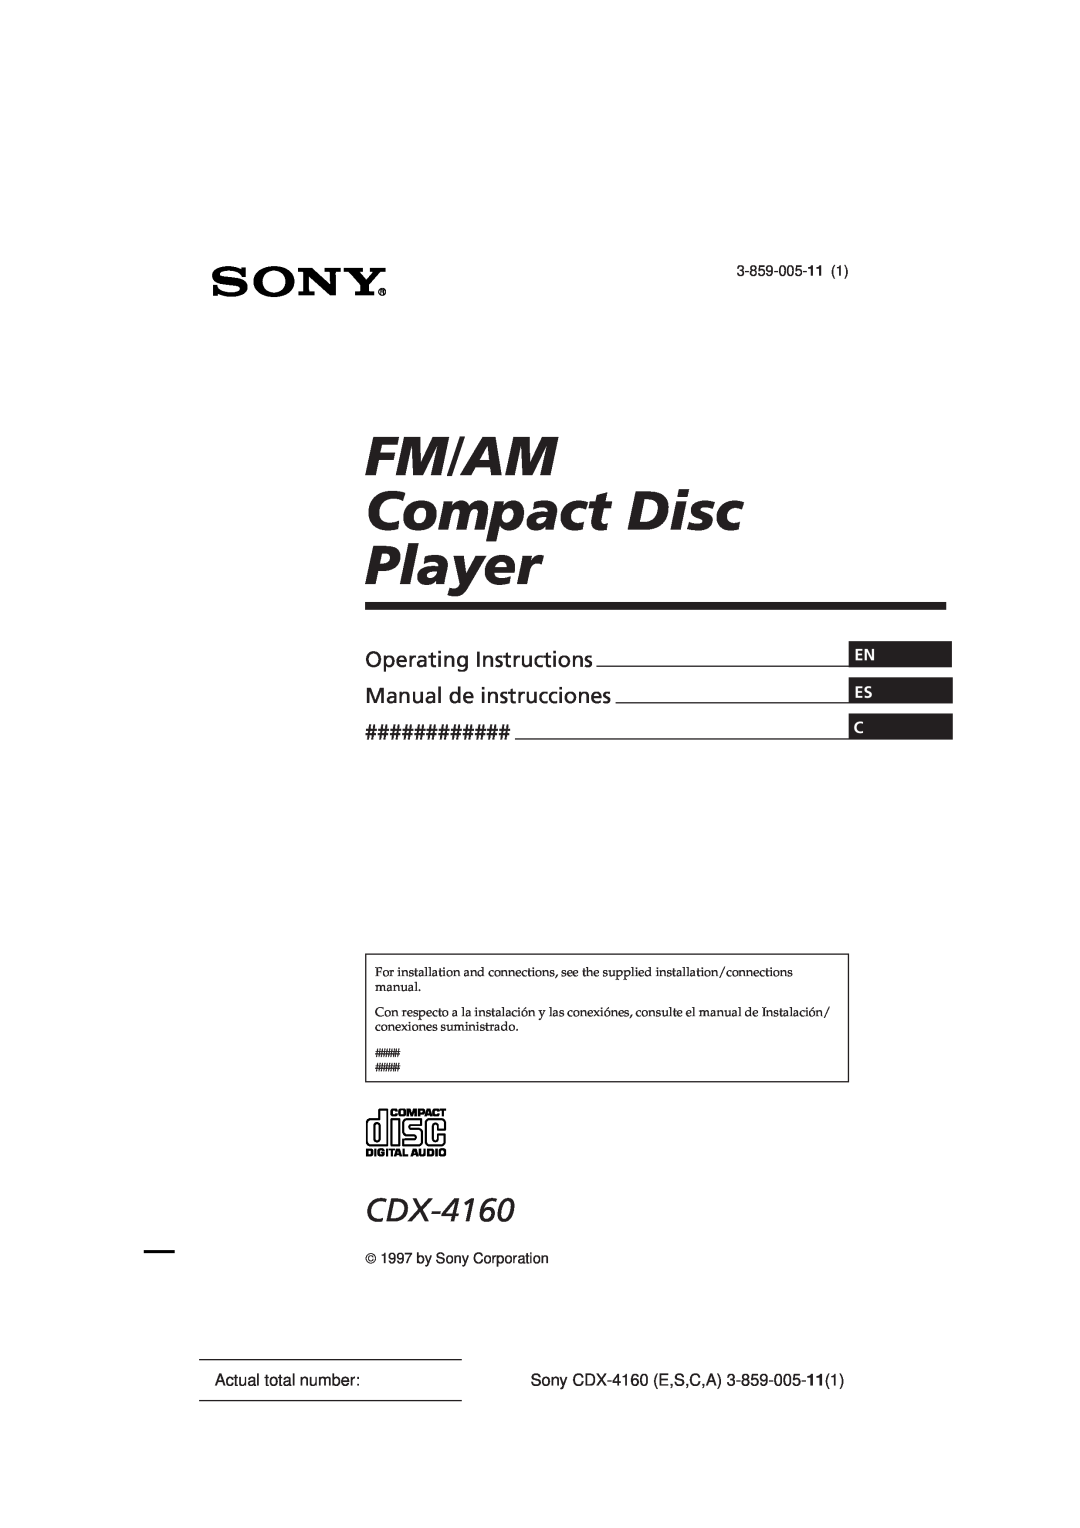 Sony operating instructions En Es C, Actual total number, 3-859-005-11, by Sony Corporation, Sony CDX-4160E,S,C,A 